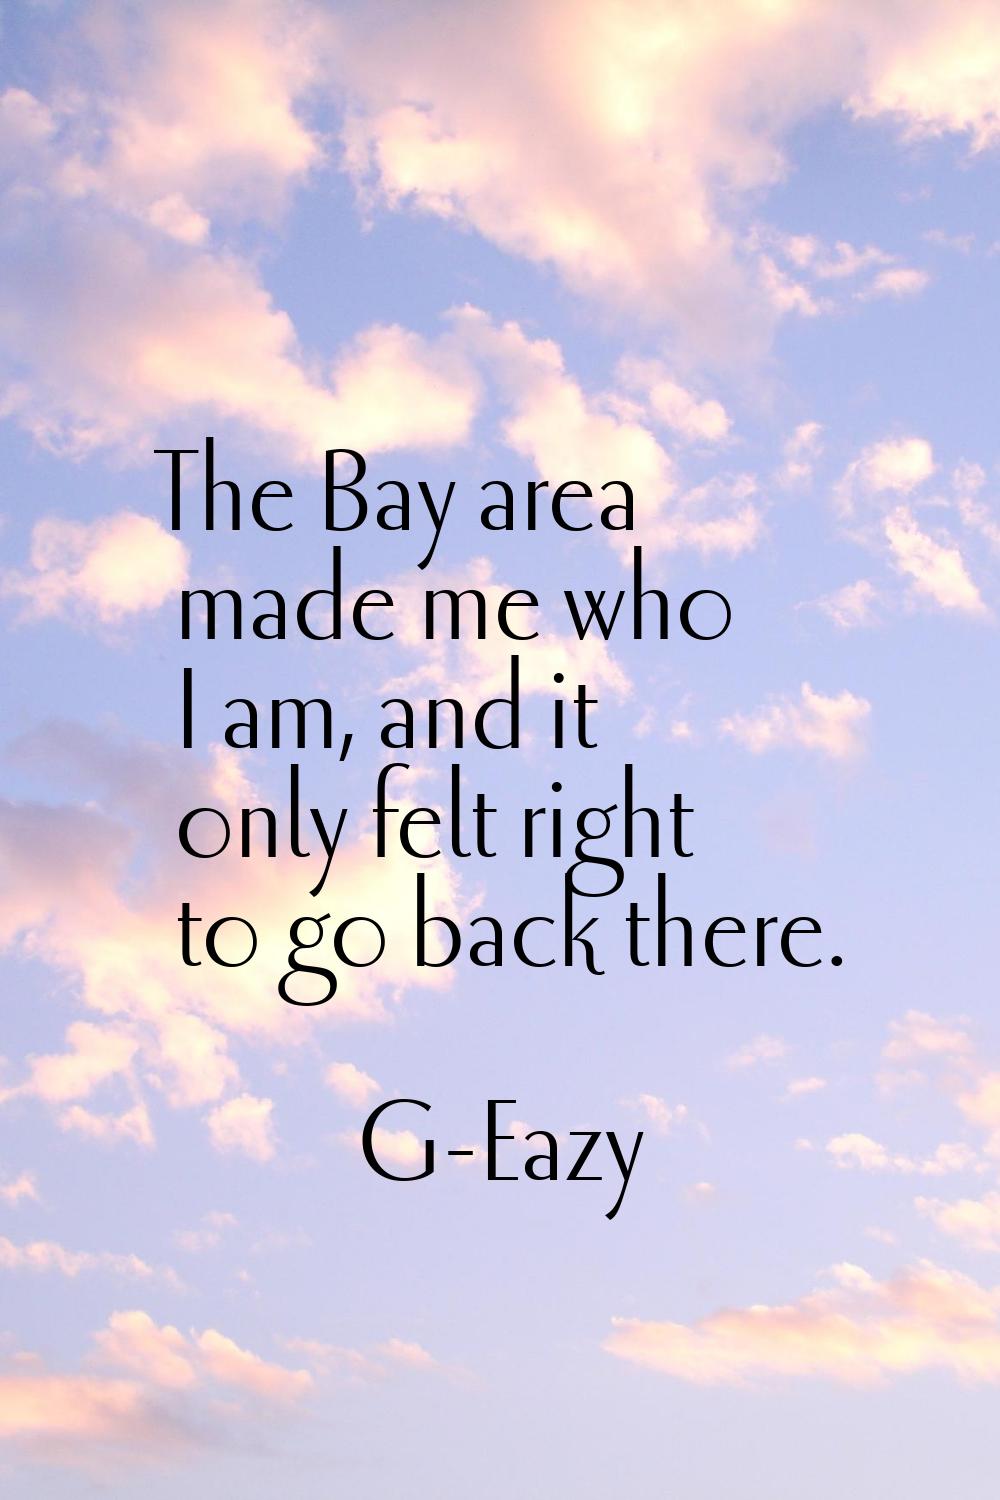 The Bay area made me who I am, and it only felt right to go back there.